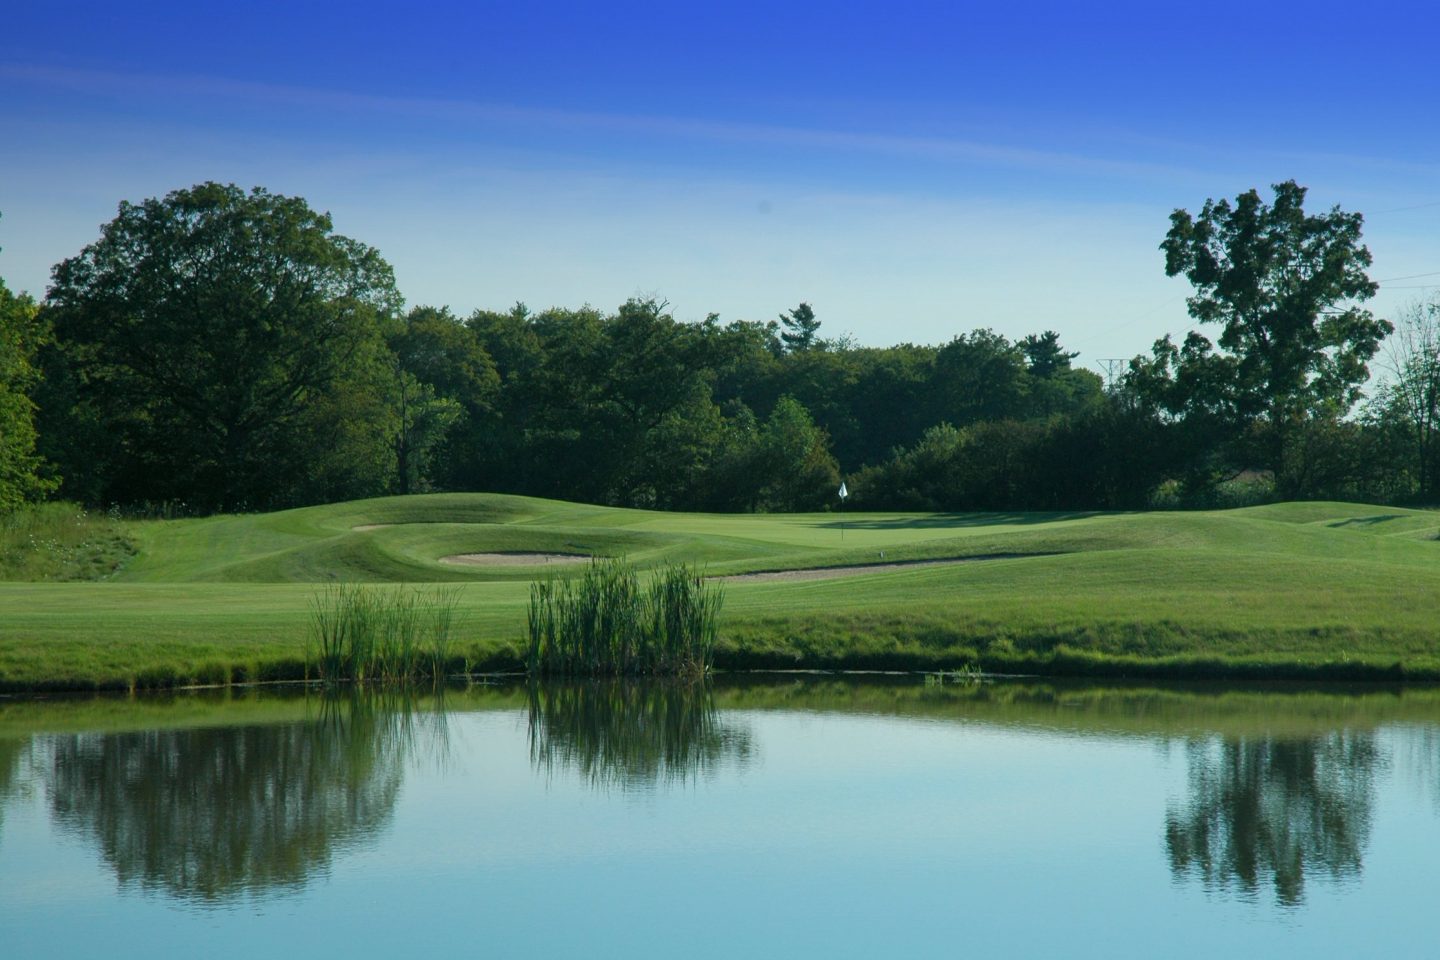 Oakville Executive Golf Courses: Mystic Ridge and Angel’s View